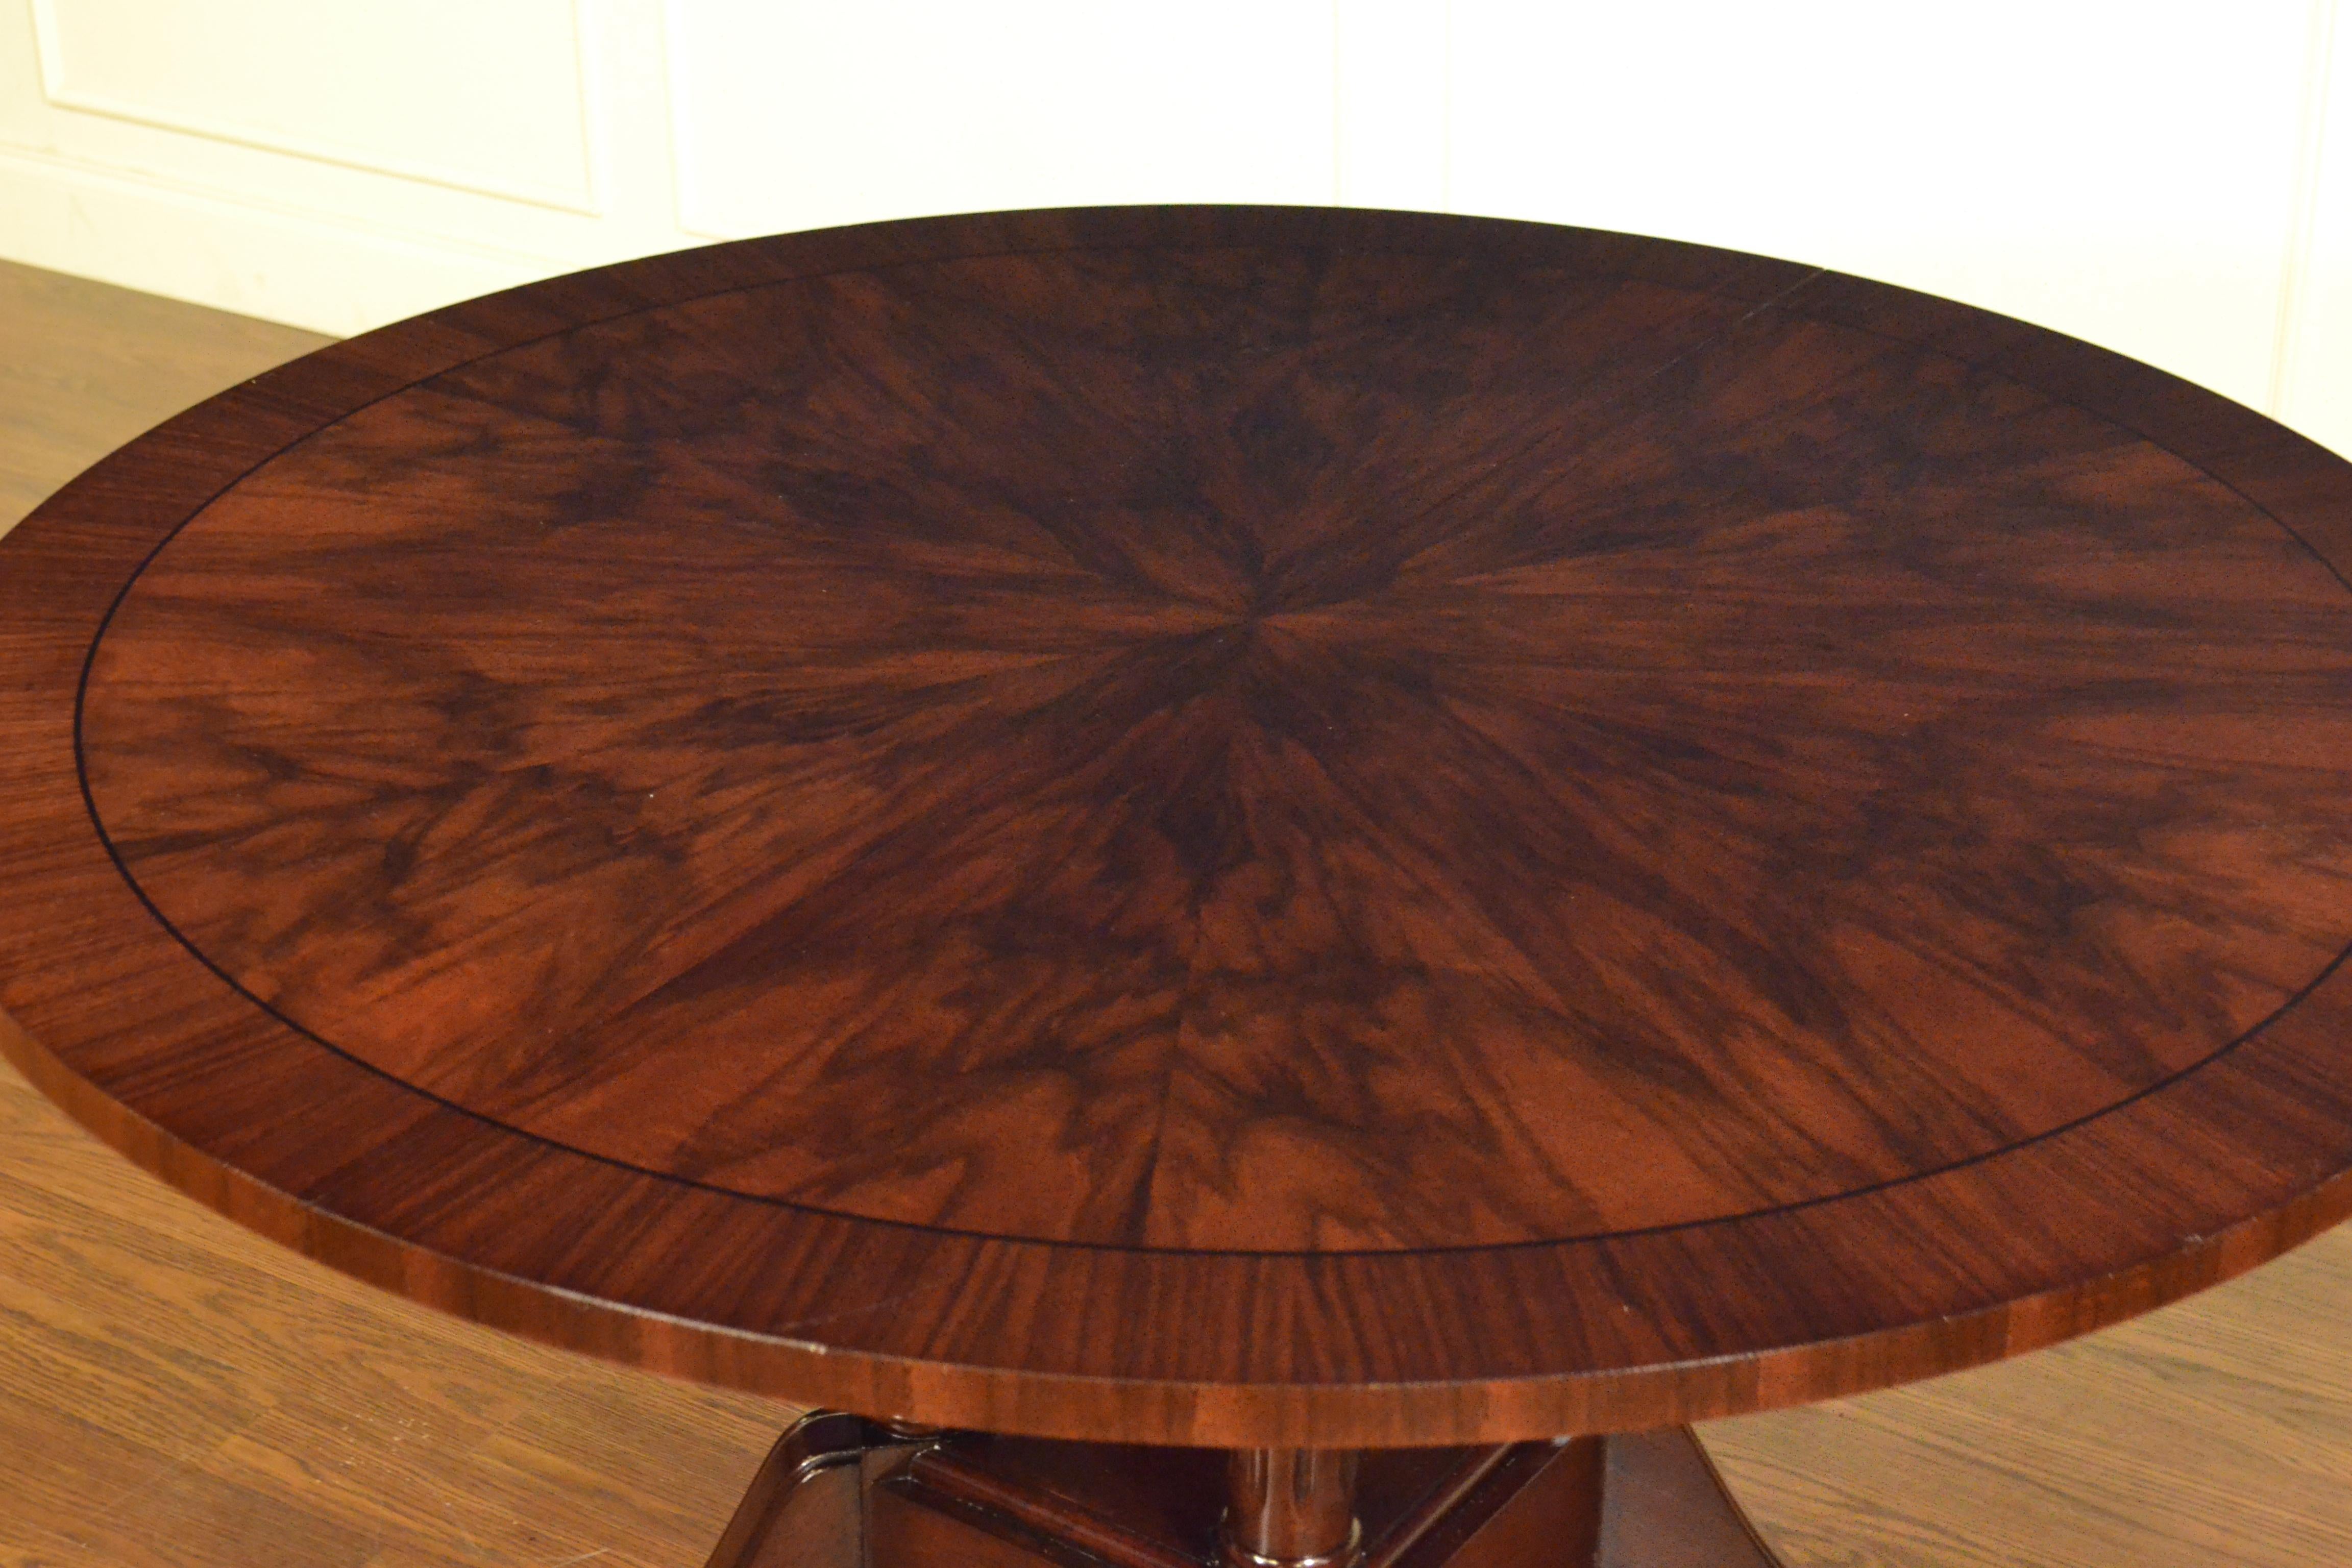 Regency Round Walnut Georgian Style Pedestal Dining Table by Leighton Hall For Sale